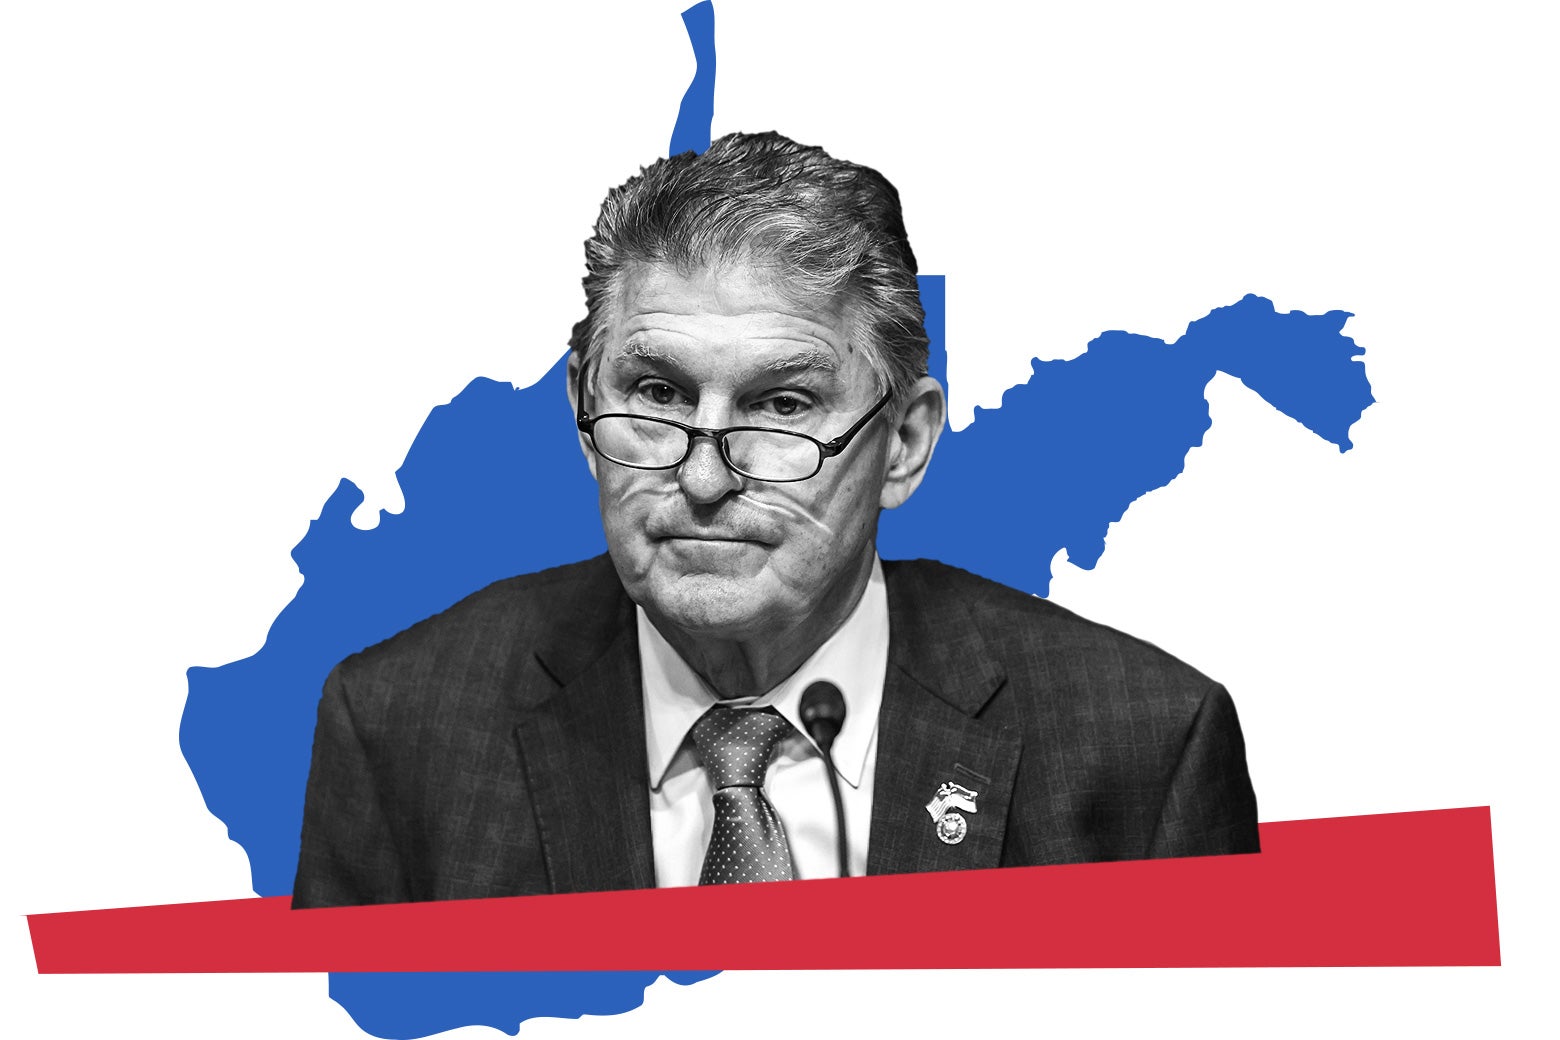 Joe Manchin wearing glasses in front of a microphone set on a red bar, with a blue drawing of West Virginia's shape in the background